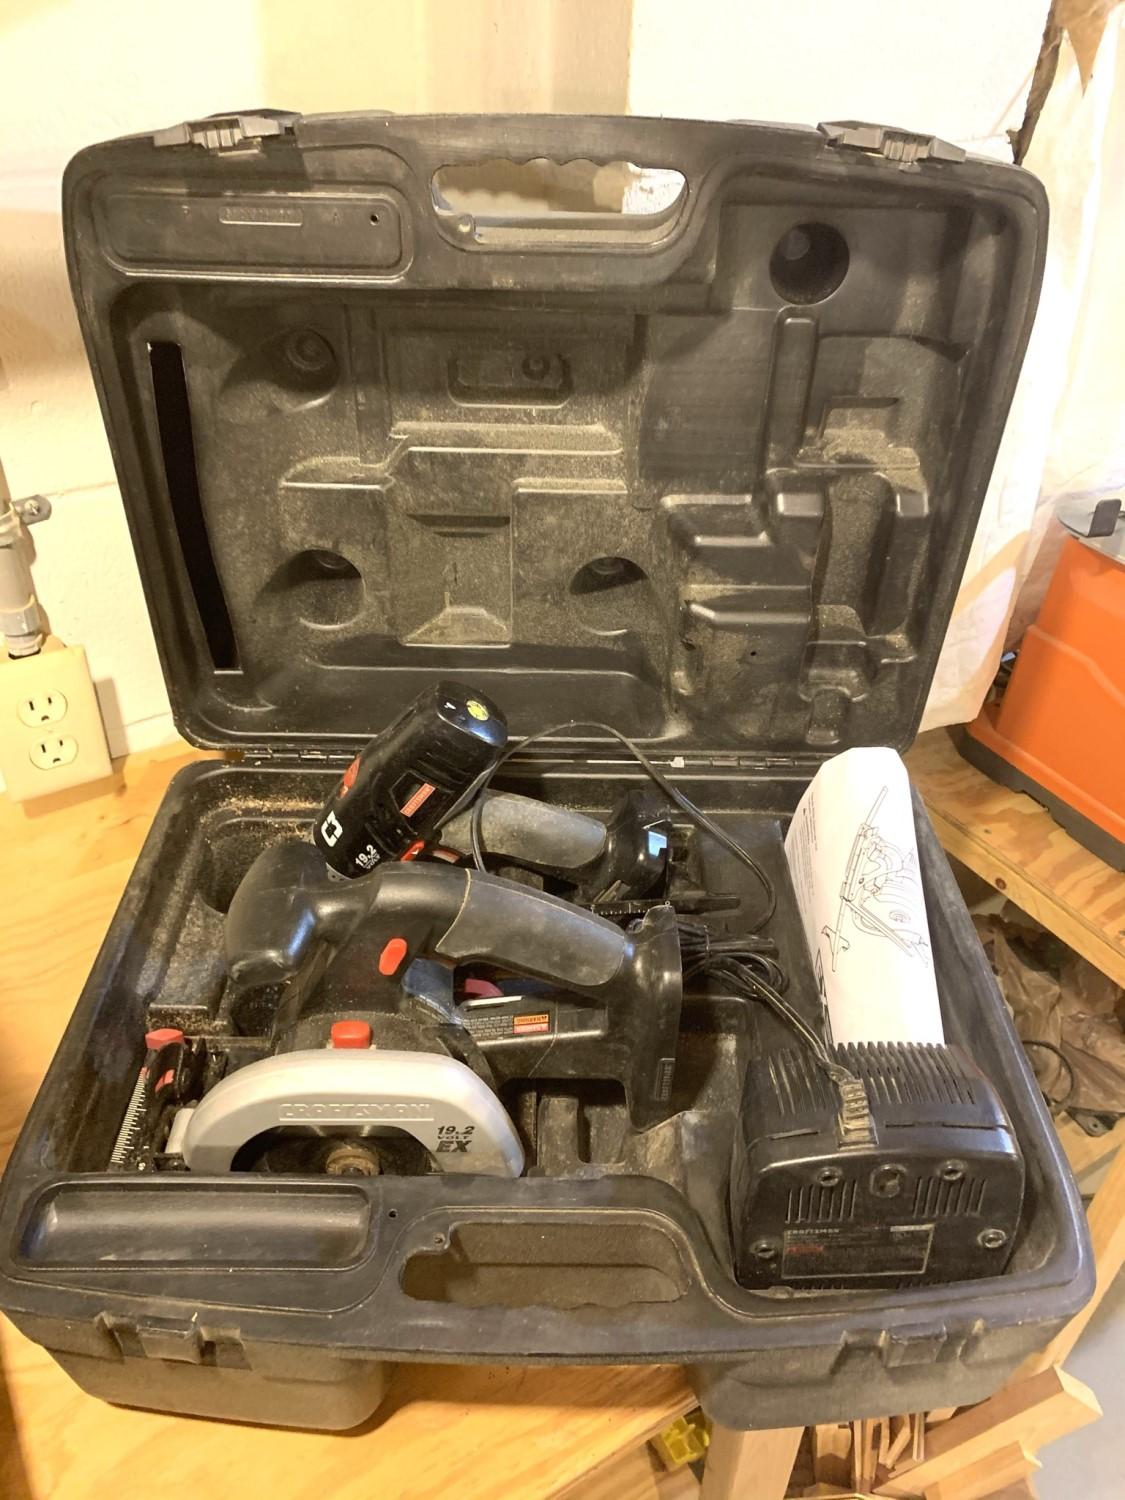 Craftsman Trim Saw, Battery Charger, & Screwdriver Combo.